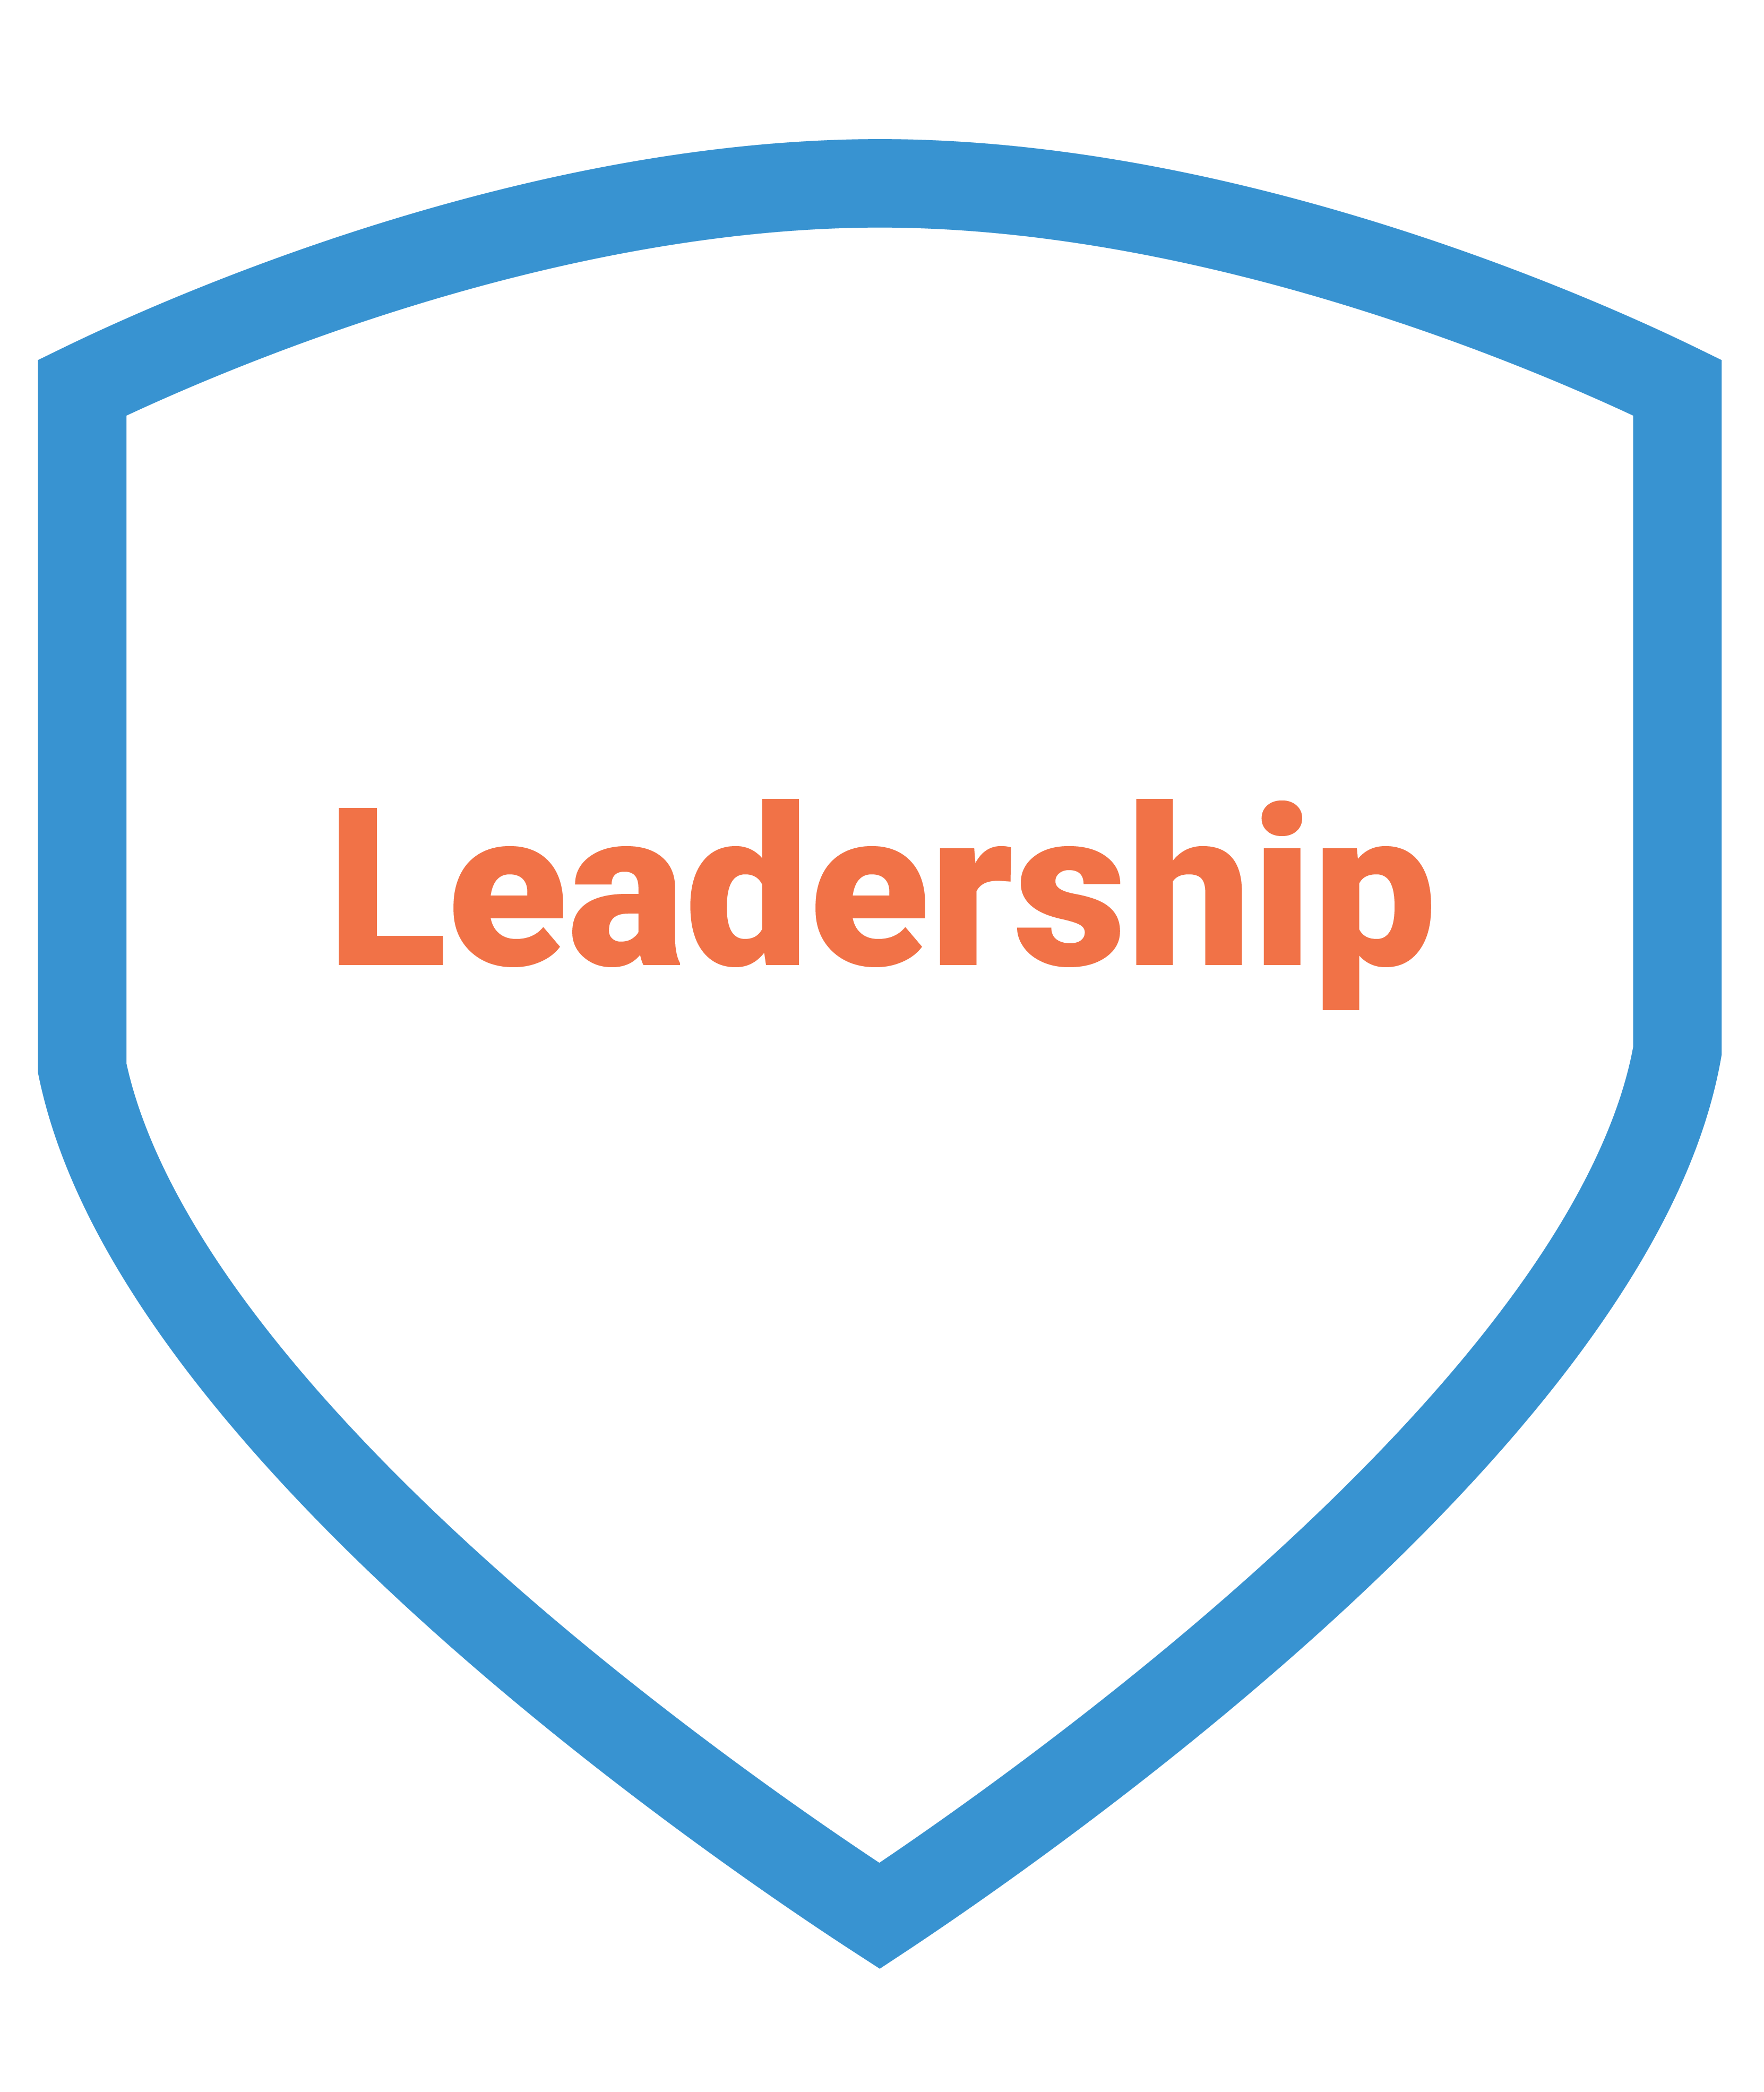 About the company - Our values - The word "Leadership" in orange text surrounded by a blue shield outline.